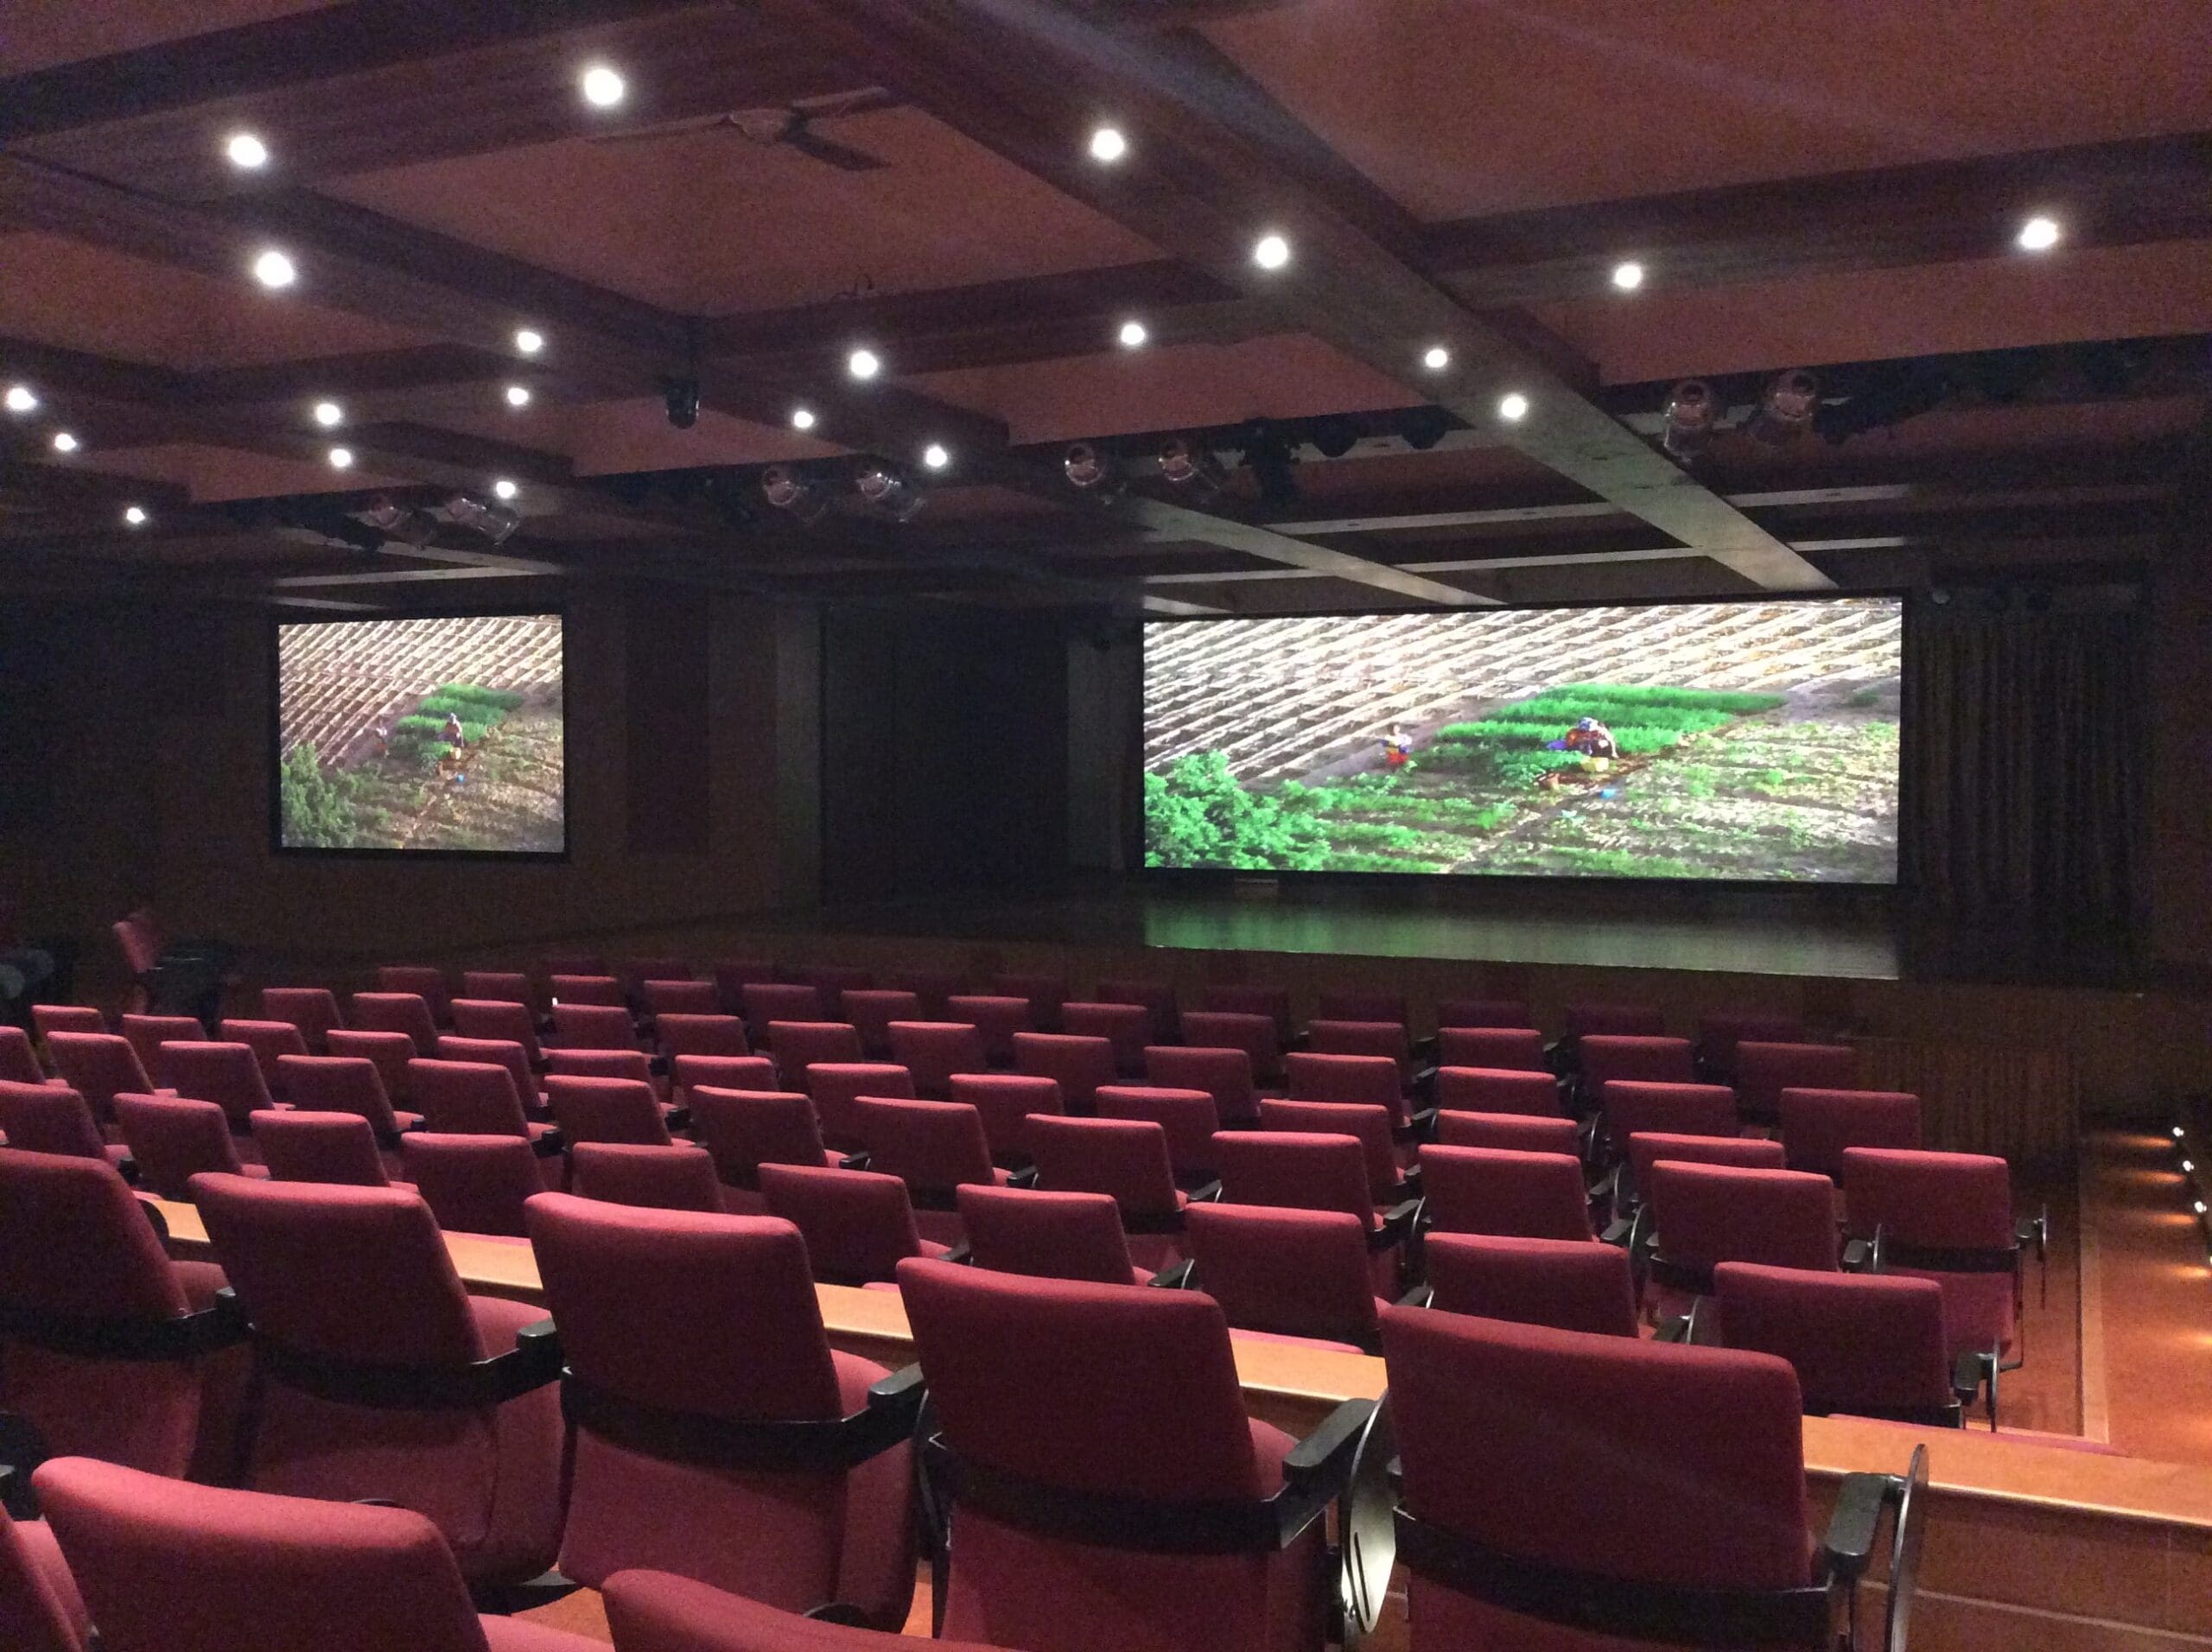 A large auditorium with a multi-screen setup and advanced sound systems for enhanced clarity.